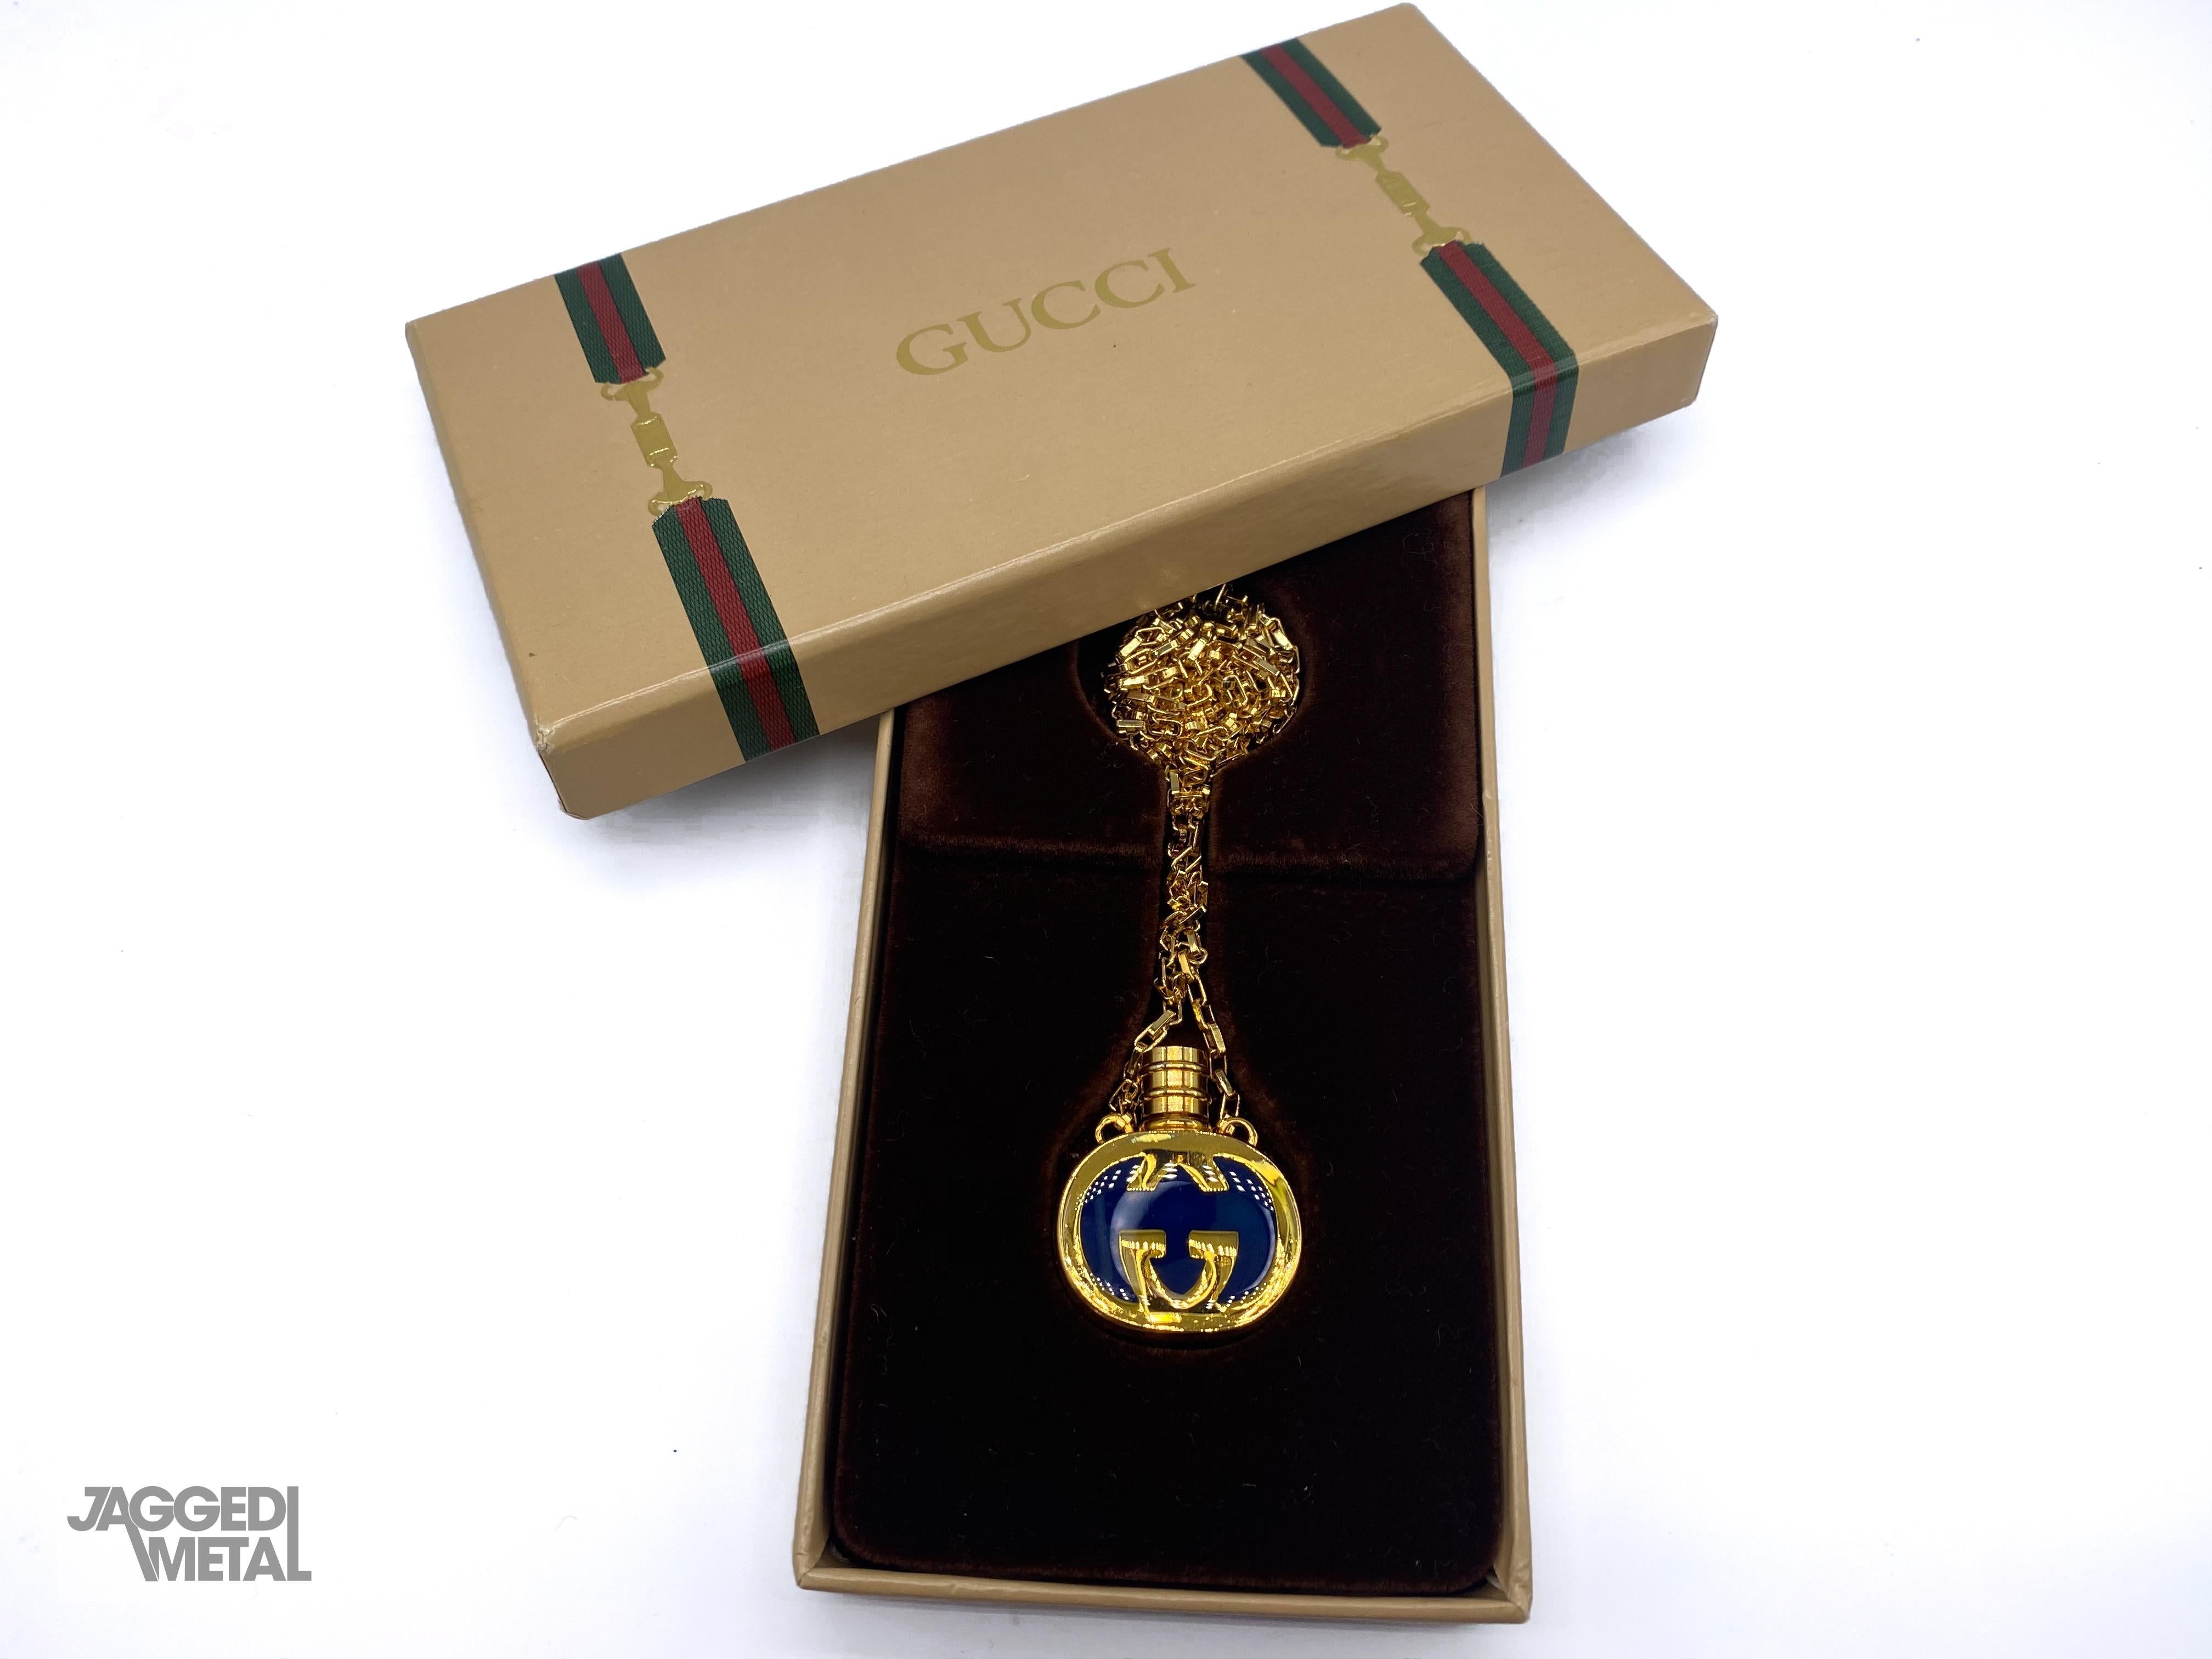 gucci perfume bottle necklace